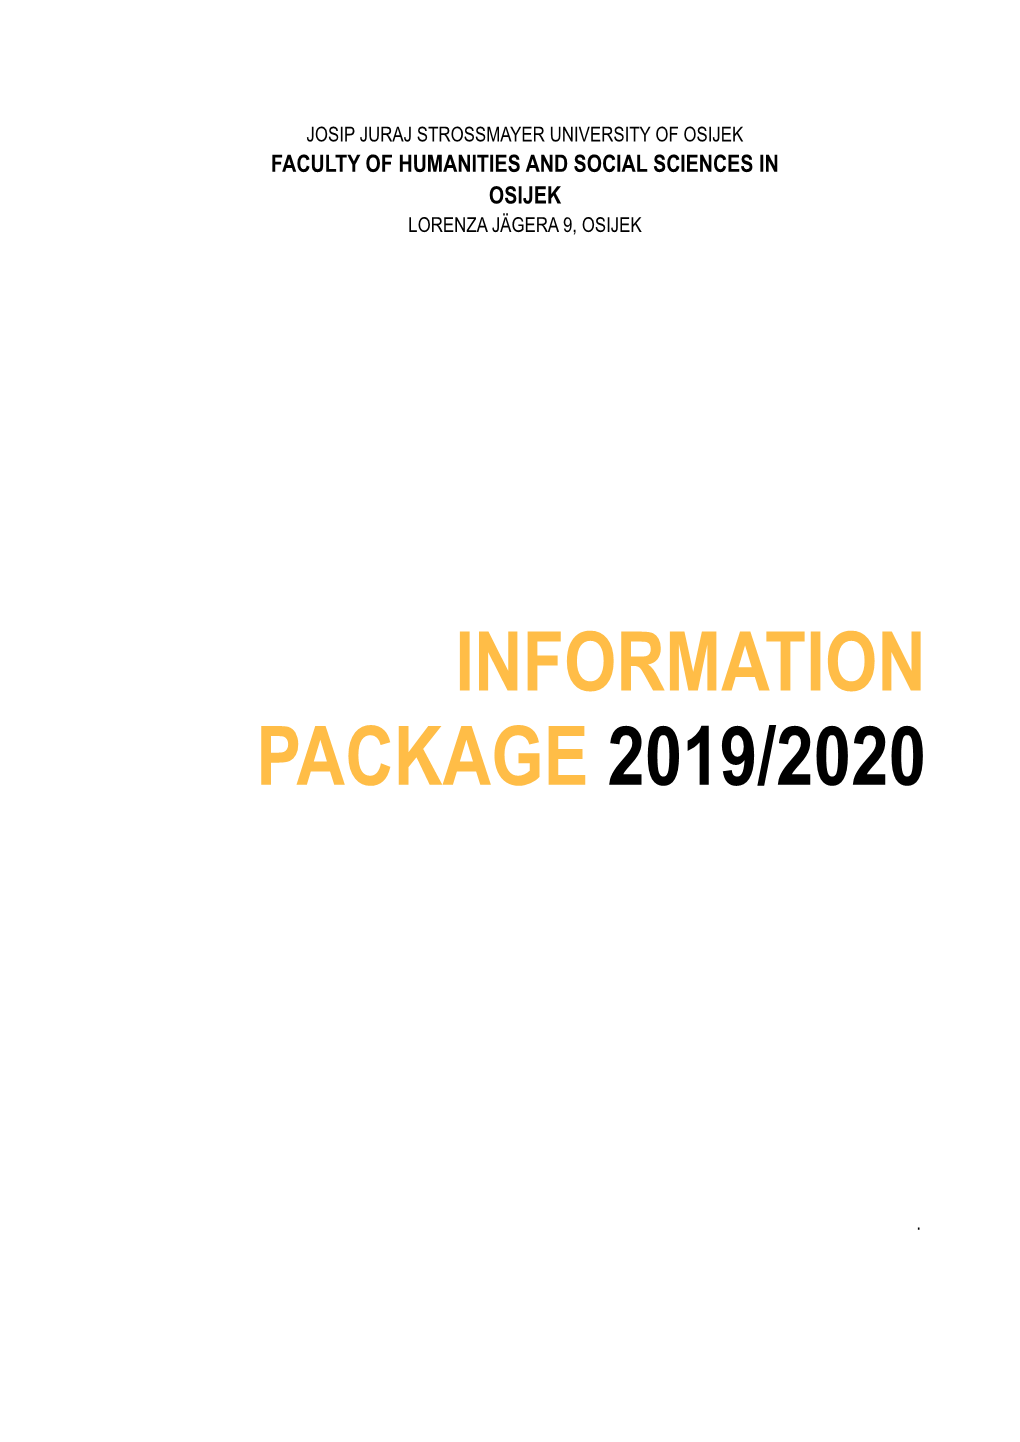 Information Package 2019/2020